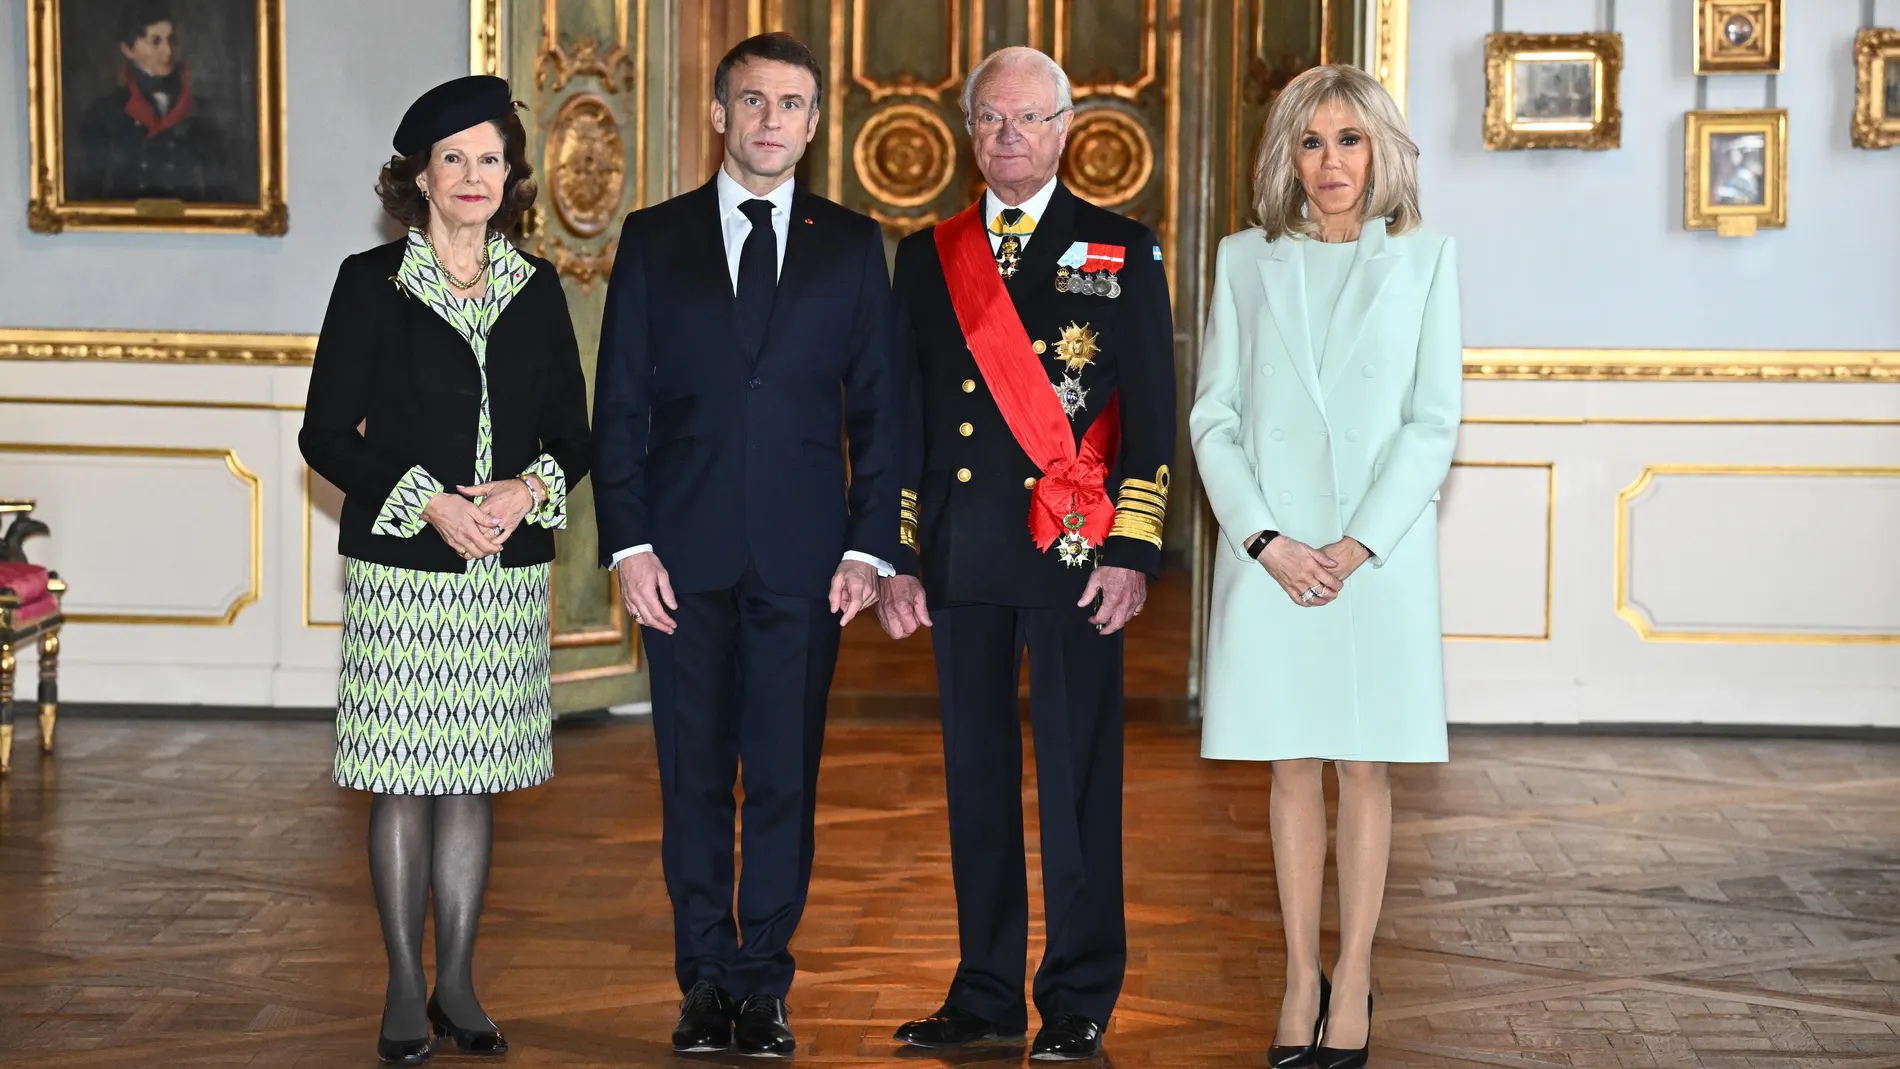 Stockholm (Sweden), 30/01/2024.- (L-R) Sweden's Queen Silvia, French President Emmanuel Macron, Sweden's King Carl XVI Gustaf and Brigitte Macron pose for a photograph at the Royal Palace in Stockholm, Sweden, 30 January 2024. French President Emmanuel Macron and his wife Brigitte Macron are on a two-day state visit to Sweden. (Francia, Suecia, Estocolmo) EFE/EPA/CLAUDIO BRESCIANI SWEDEN OUT 